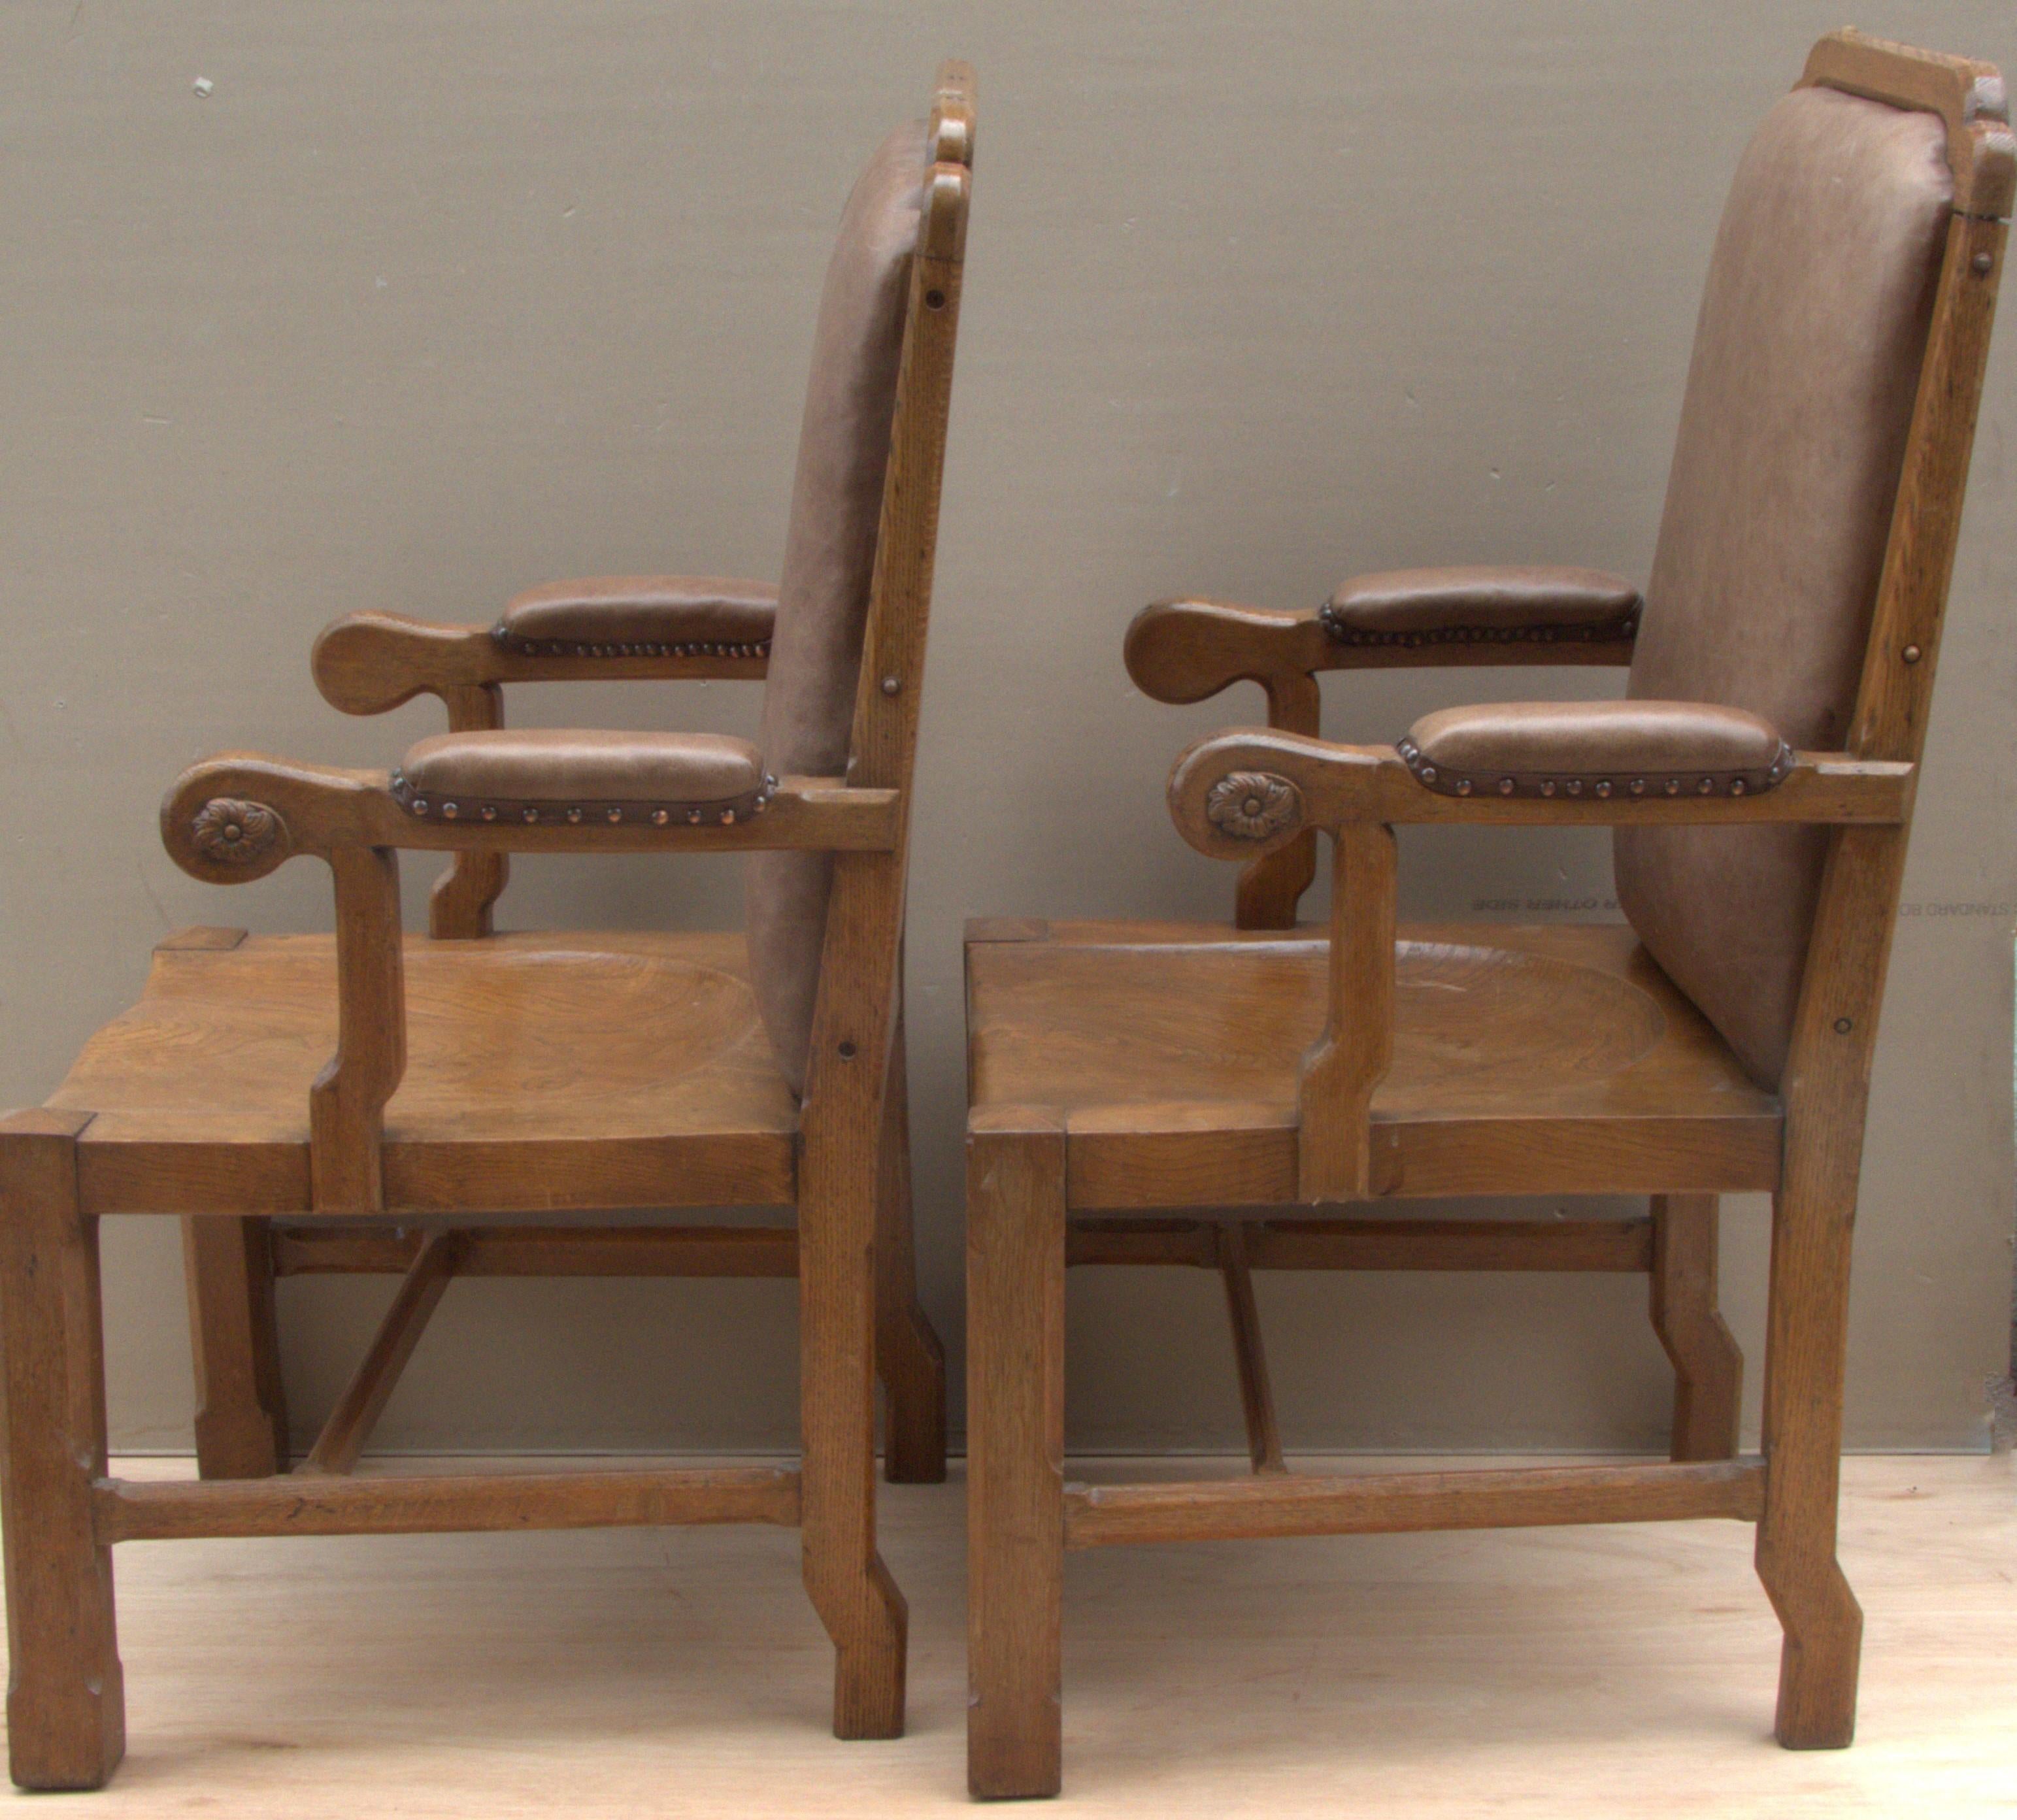 A god pair of executive Arm Chairs made in solid oak, most comfortable with leather padded back and arm rests.